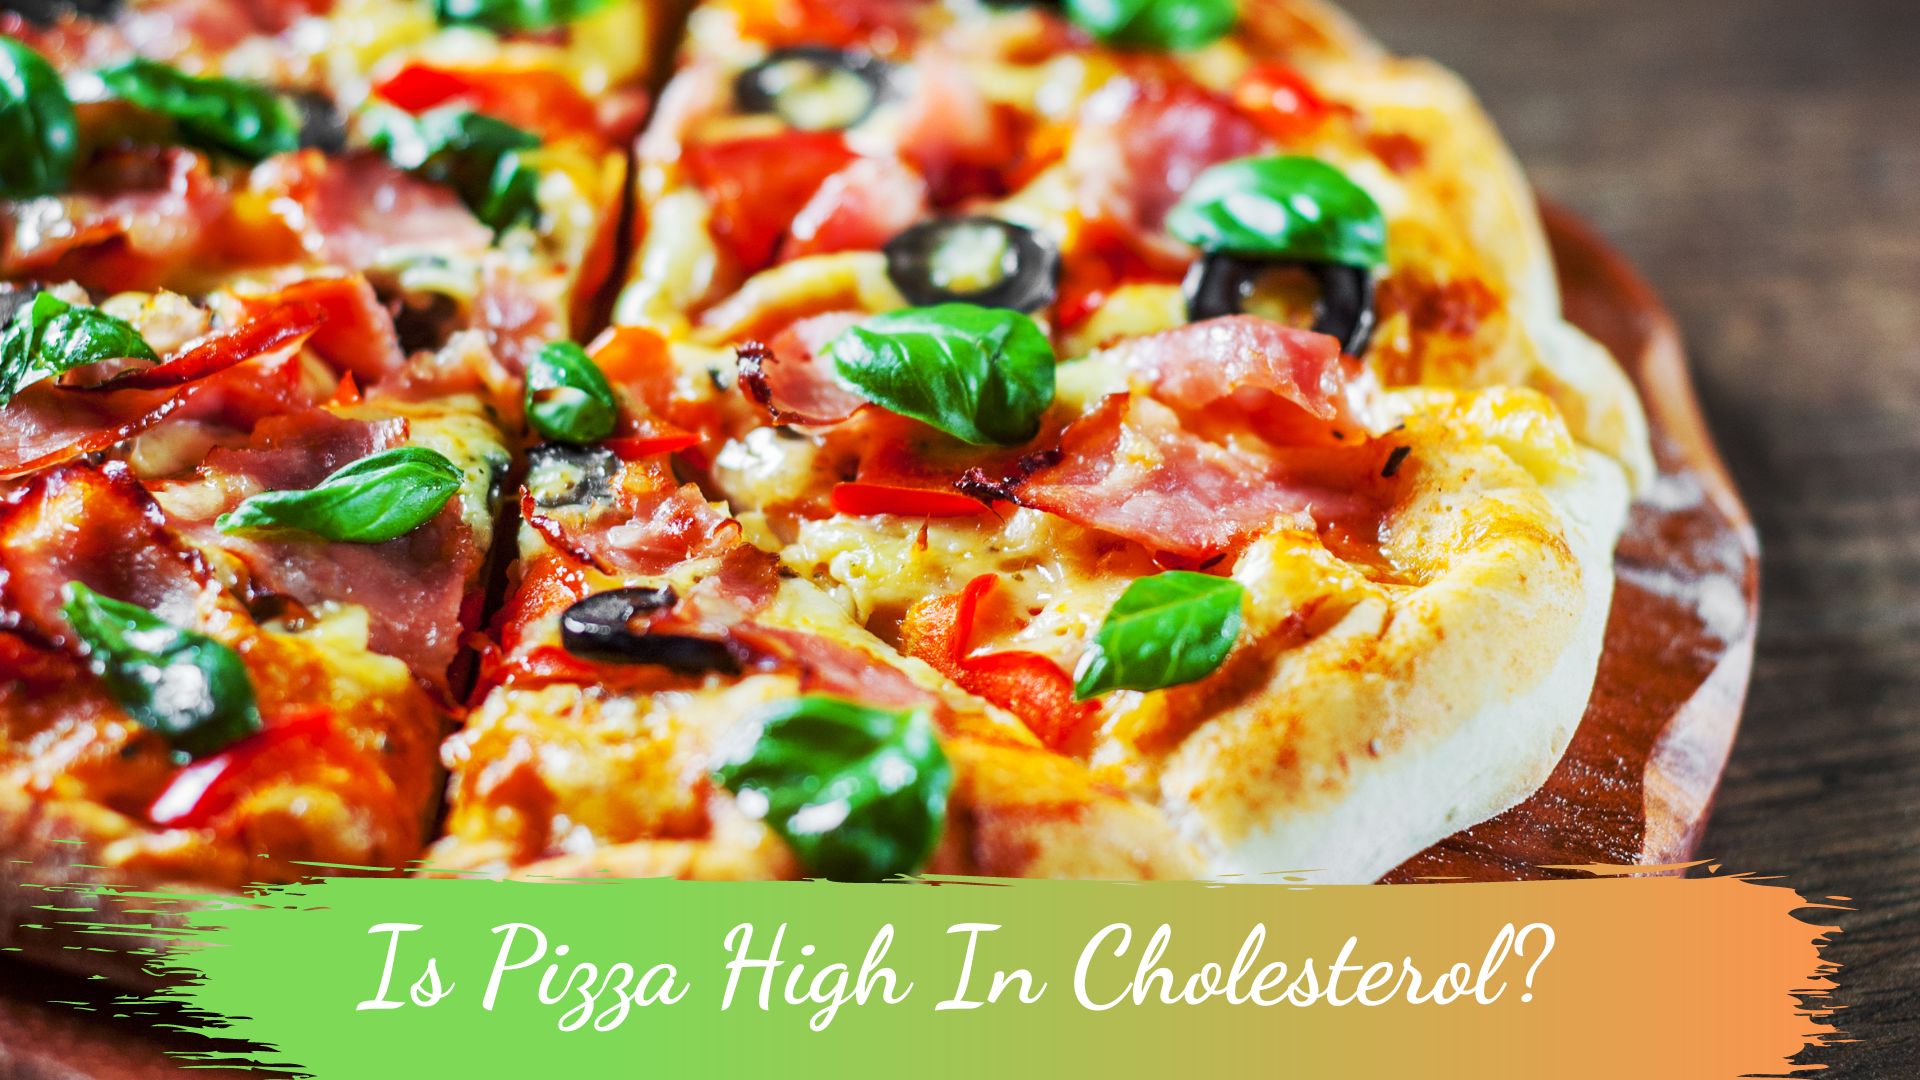 Is Pizza High In Cholesterol